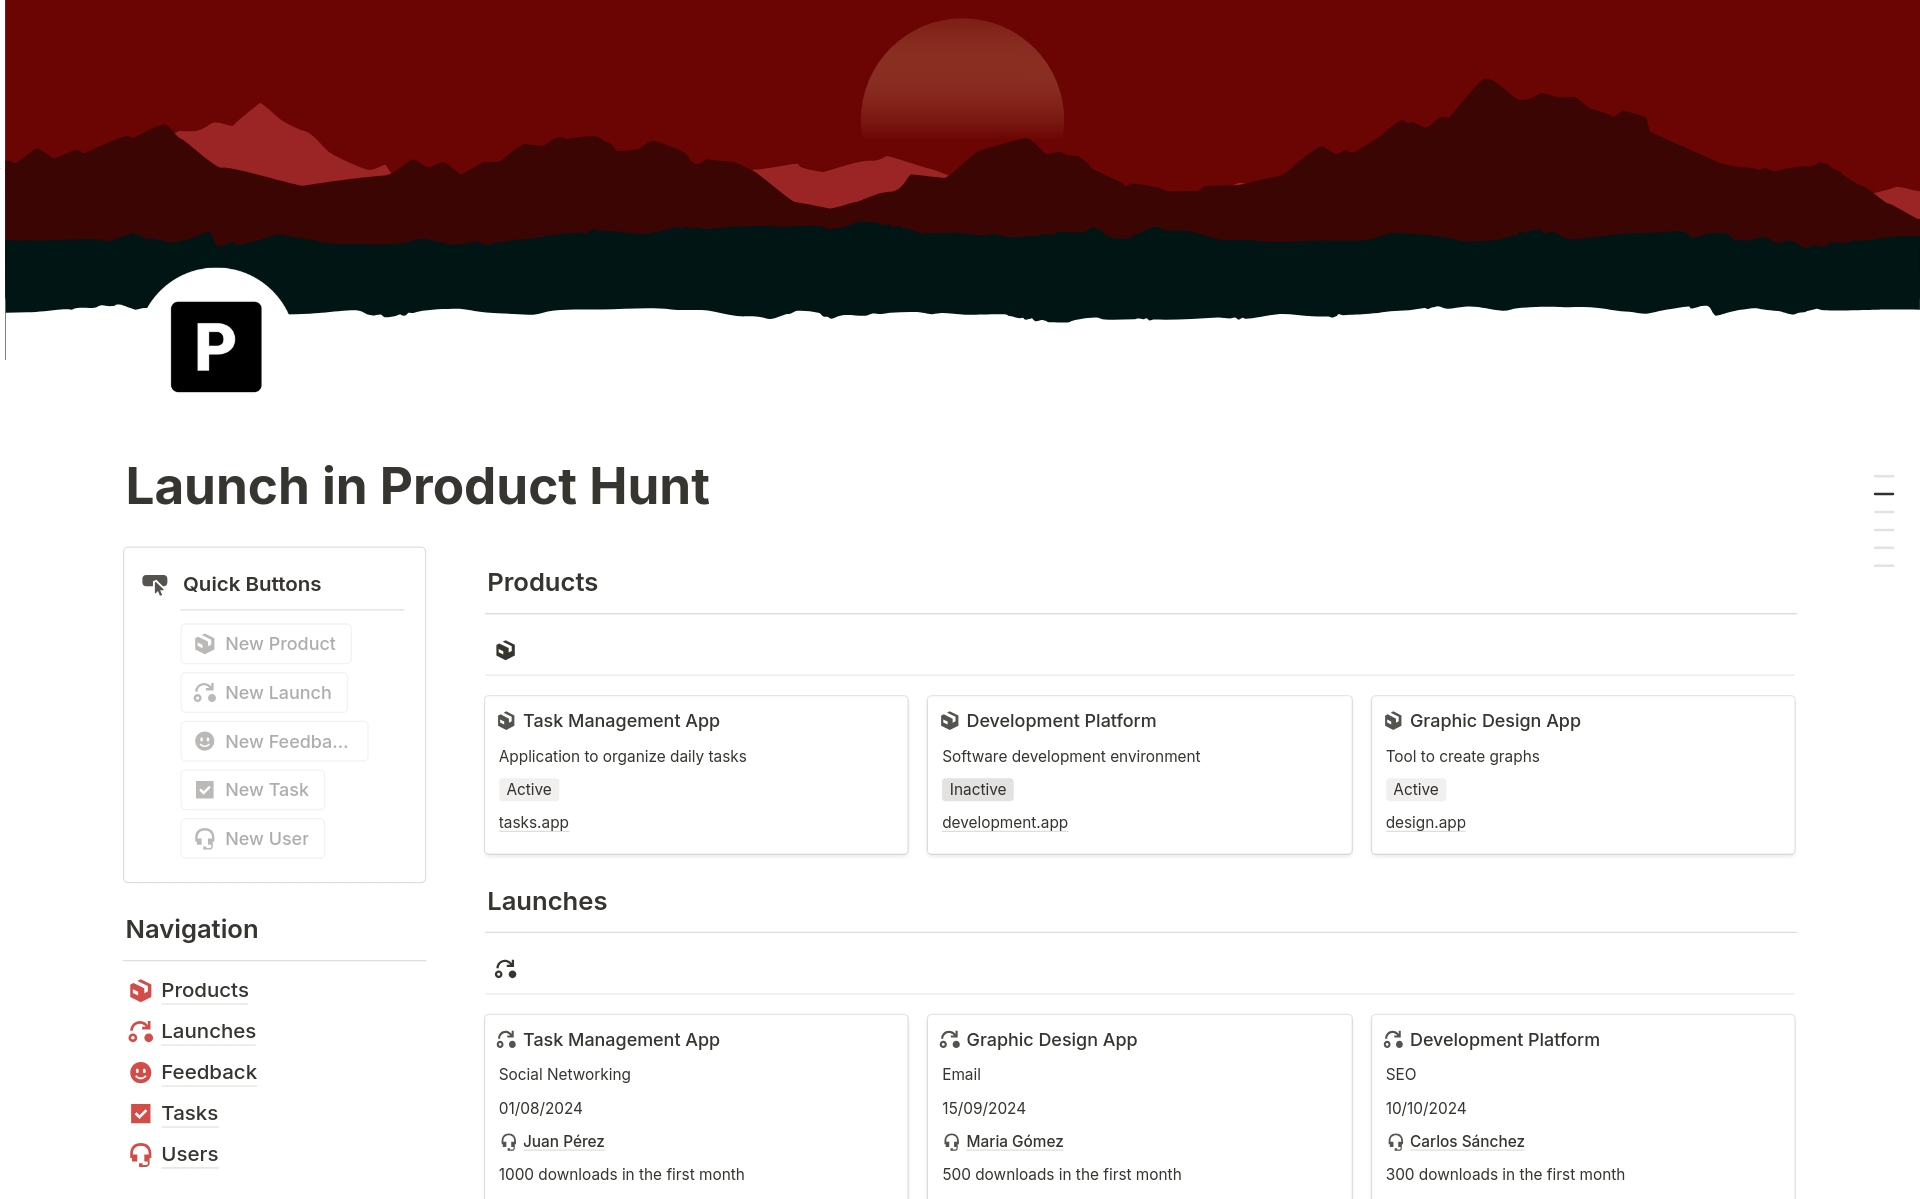 Plan and manage your launch on Product Hunt with this template. Organize each stage and maximize your impact on the platform.